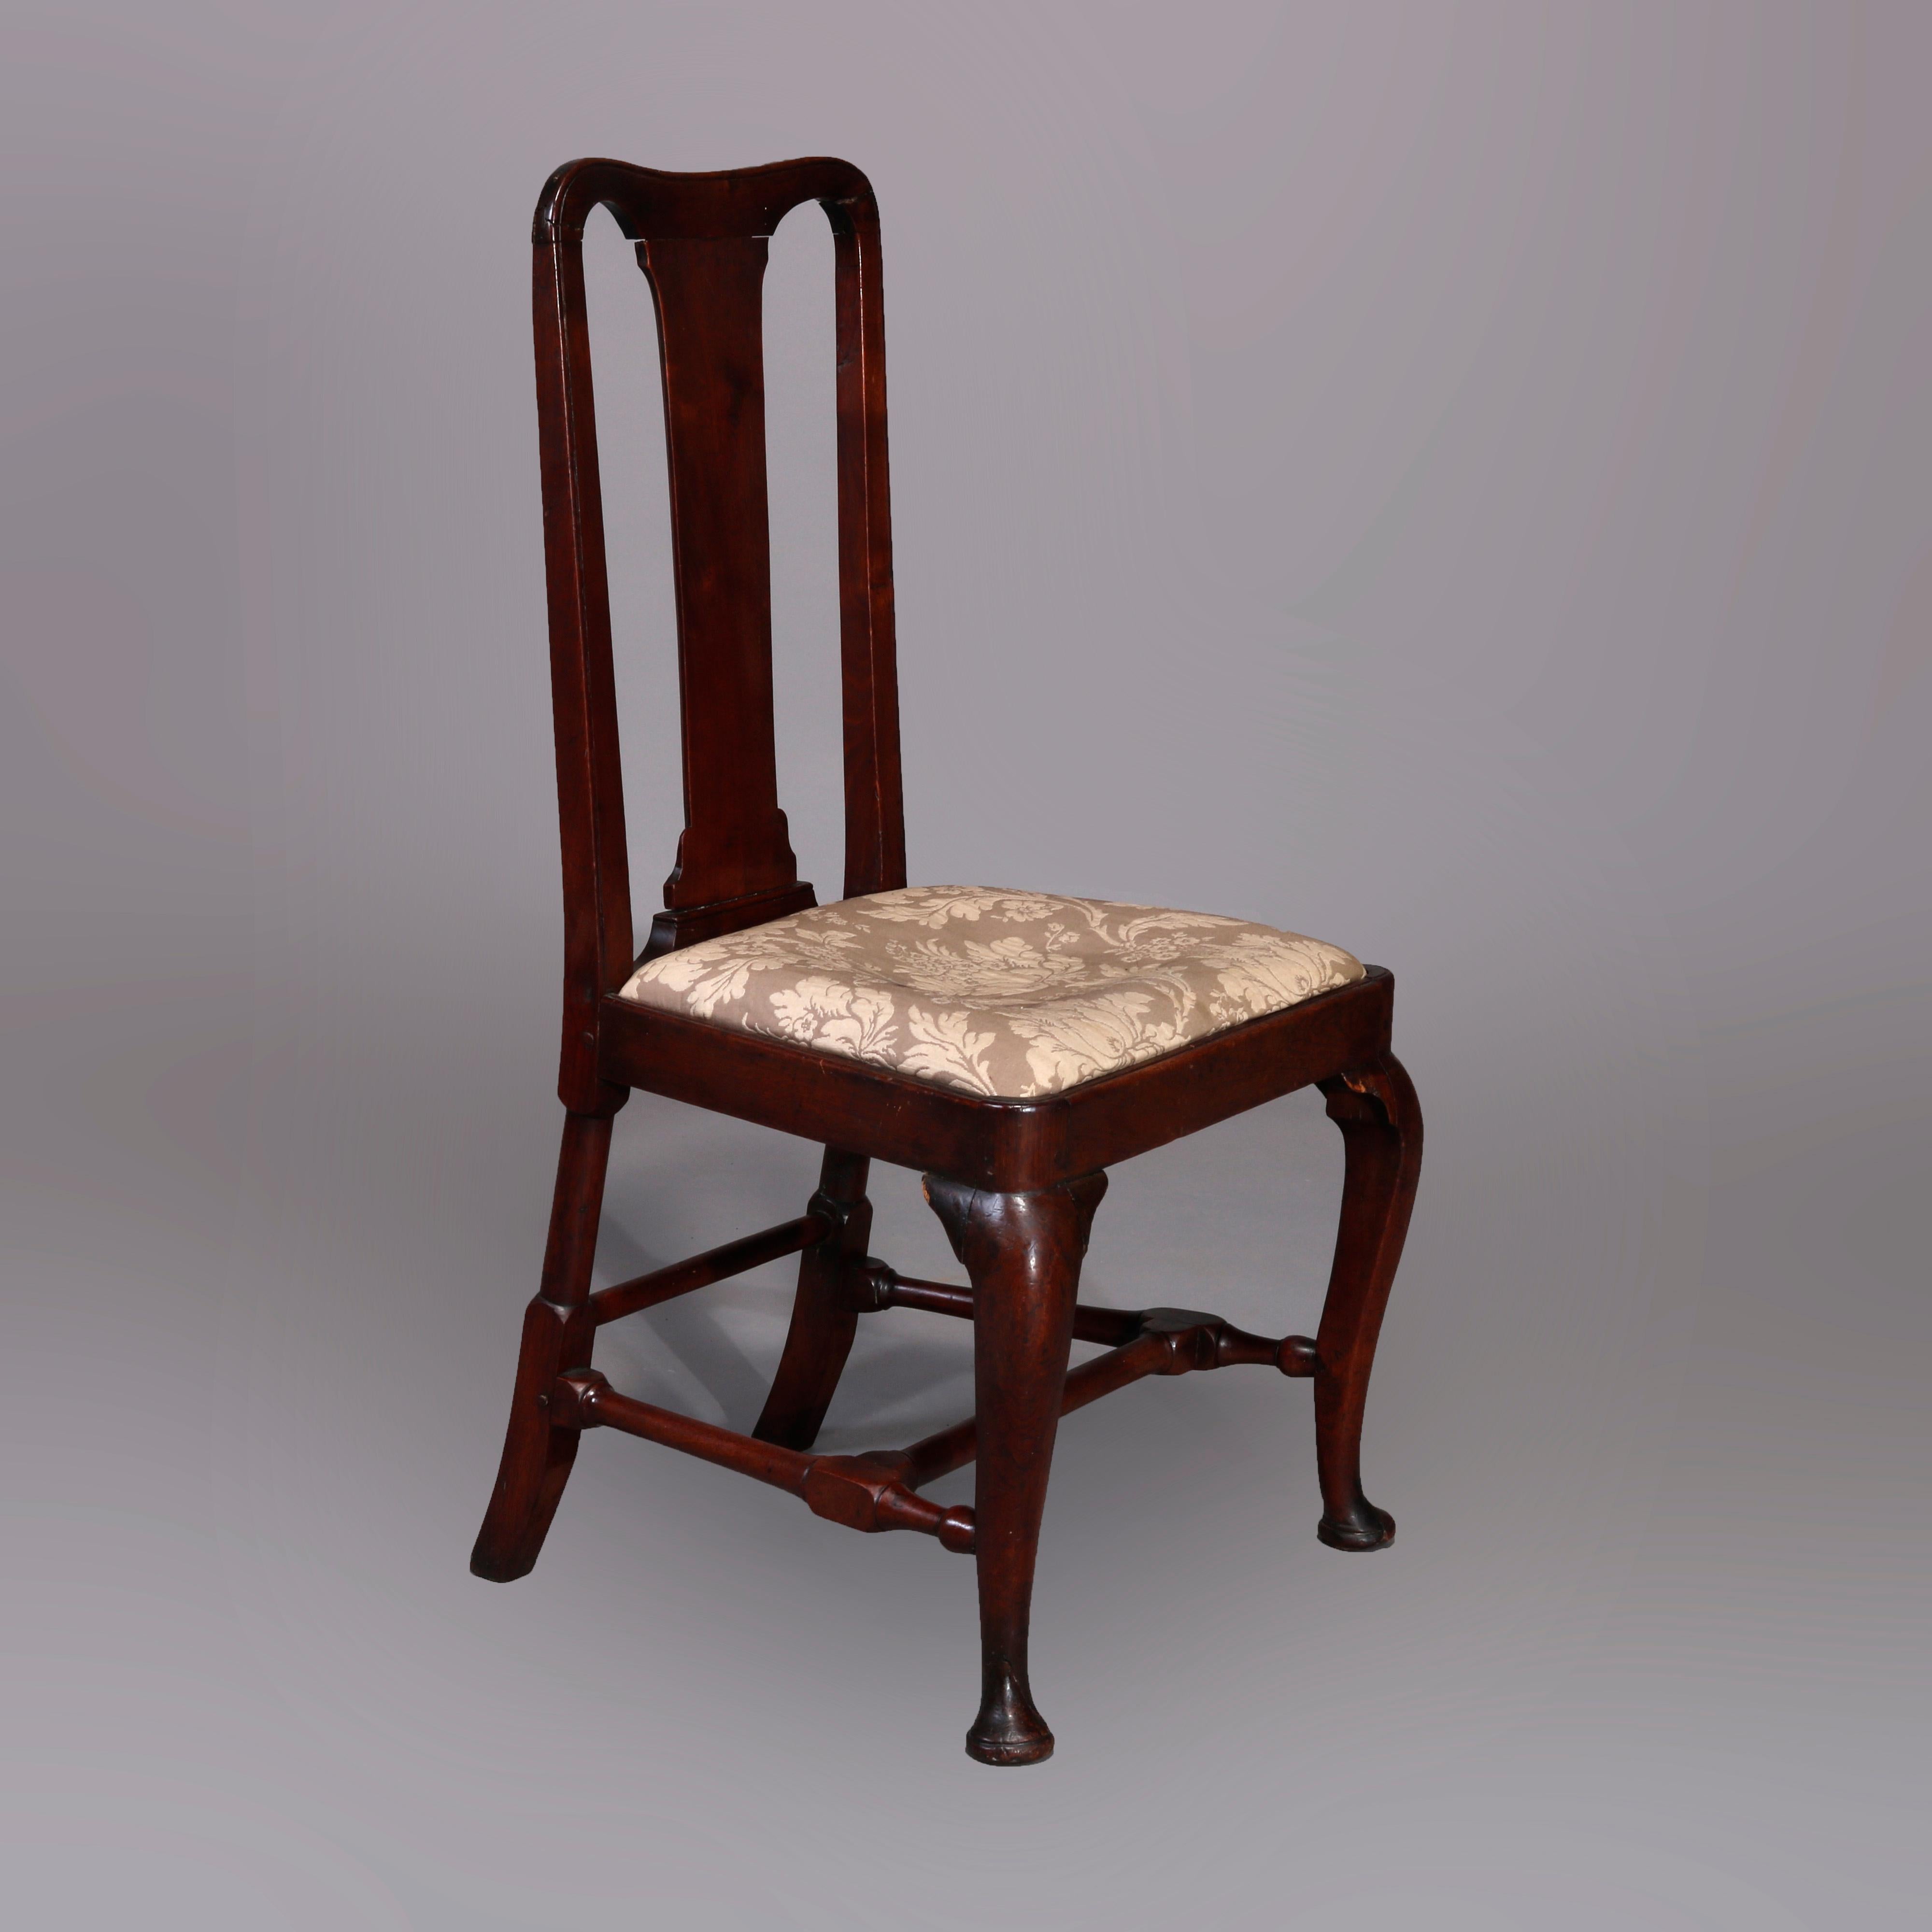 An antique pair of Queen Anne side chairs made in New England offer carved mahogany construction with slat backs, upholstered seats, raised on cabriole legs with pad feet, circa 1760

Measures: 1st chair 38.25